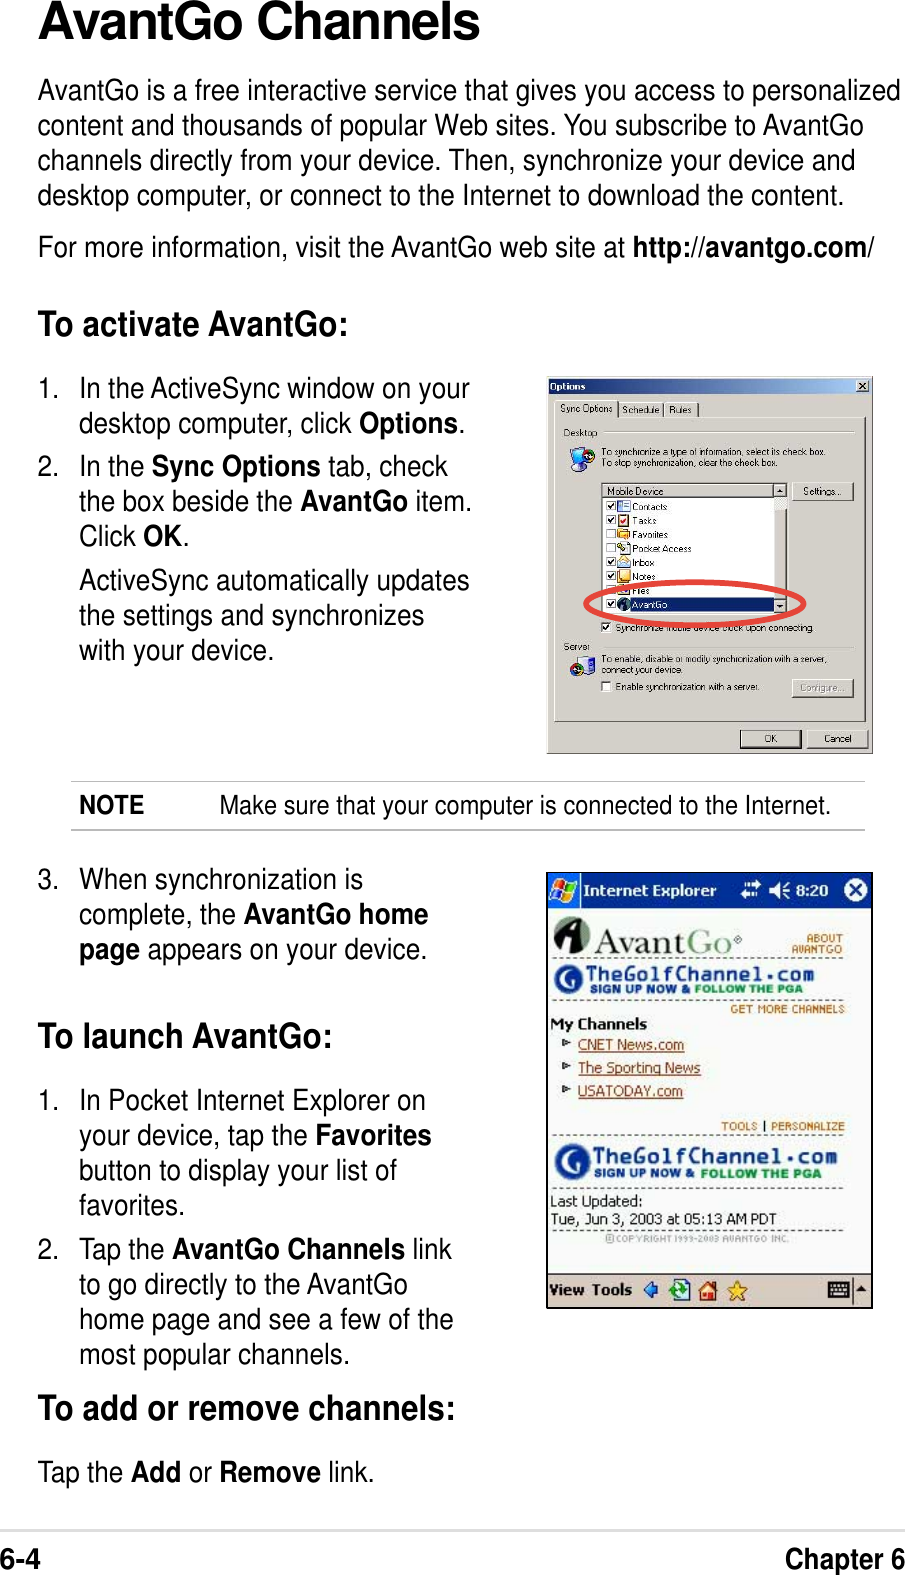 6-4Chapter 6AvantGo ChannelsAvantGo is a free interactive service that gives you access to personalizedcontent and thousands of popular Web sites. You subscribe to AvantGochannels directly from your device. Then, synchronize your device anddesktop computer, or connect to the Internet to download the content.For more information, visit the AvantGo web site at http://avantgo.com/To activate AvantGo:1. In the ActiveSync window on yourdesktop computer, click Options.2. In the Sync Options tab, checkthe box beside the AvantGo item.Click OK.ActiveSync automatically updatesthe settings and synchronizeswith your device.NOTE Make sure that your computer is connected to the Internet.3. When synchronization iscomplete, the AvantGo homepage appears on your device.To launch AvantGo:1. In Pocket Internet Explorer onyour device, tap the Favoritesbutton to display your list offavorites.2. Tap the AvantGo Channels linkto go directly to the AvantGohome page and see a few of themost popular channels.To add or remove channels:Tap the Add or Remove link.